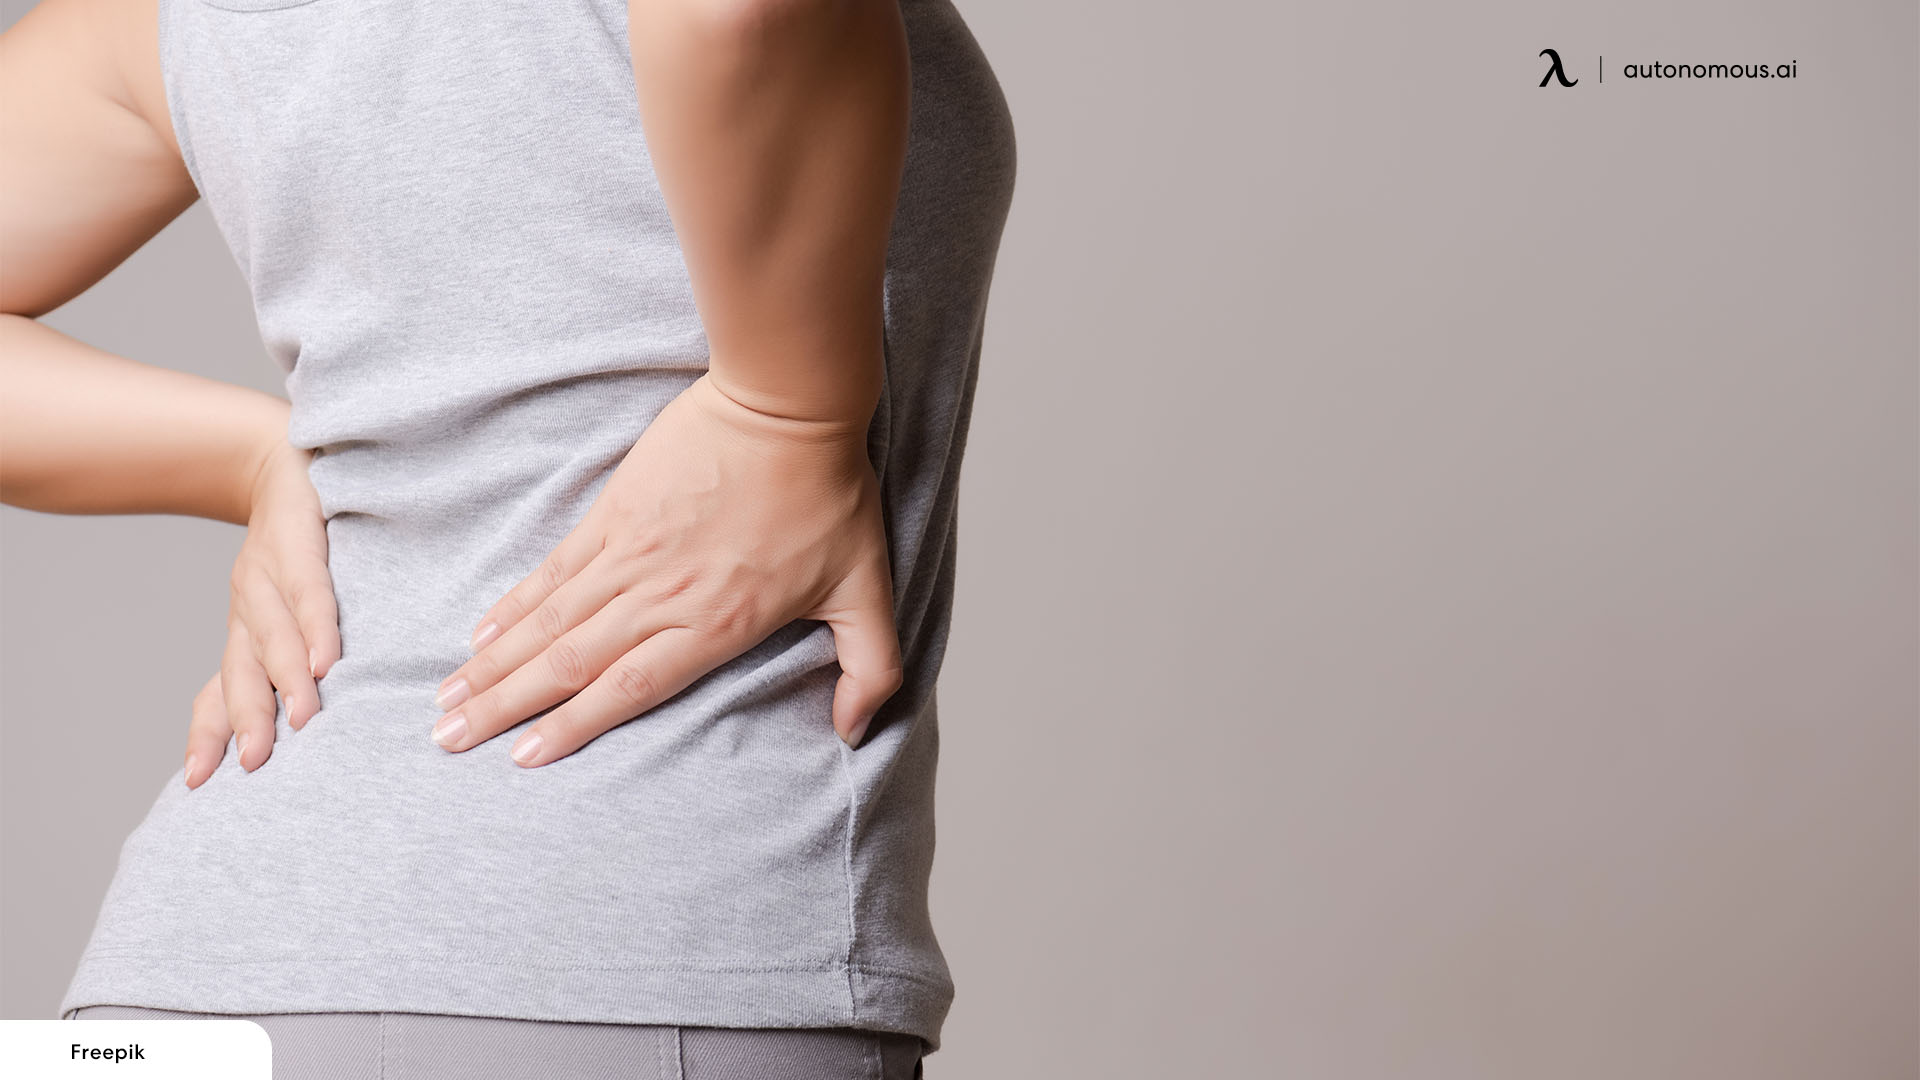 What Causes Back Pain and How Can You Prevent It?